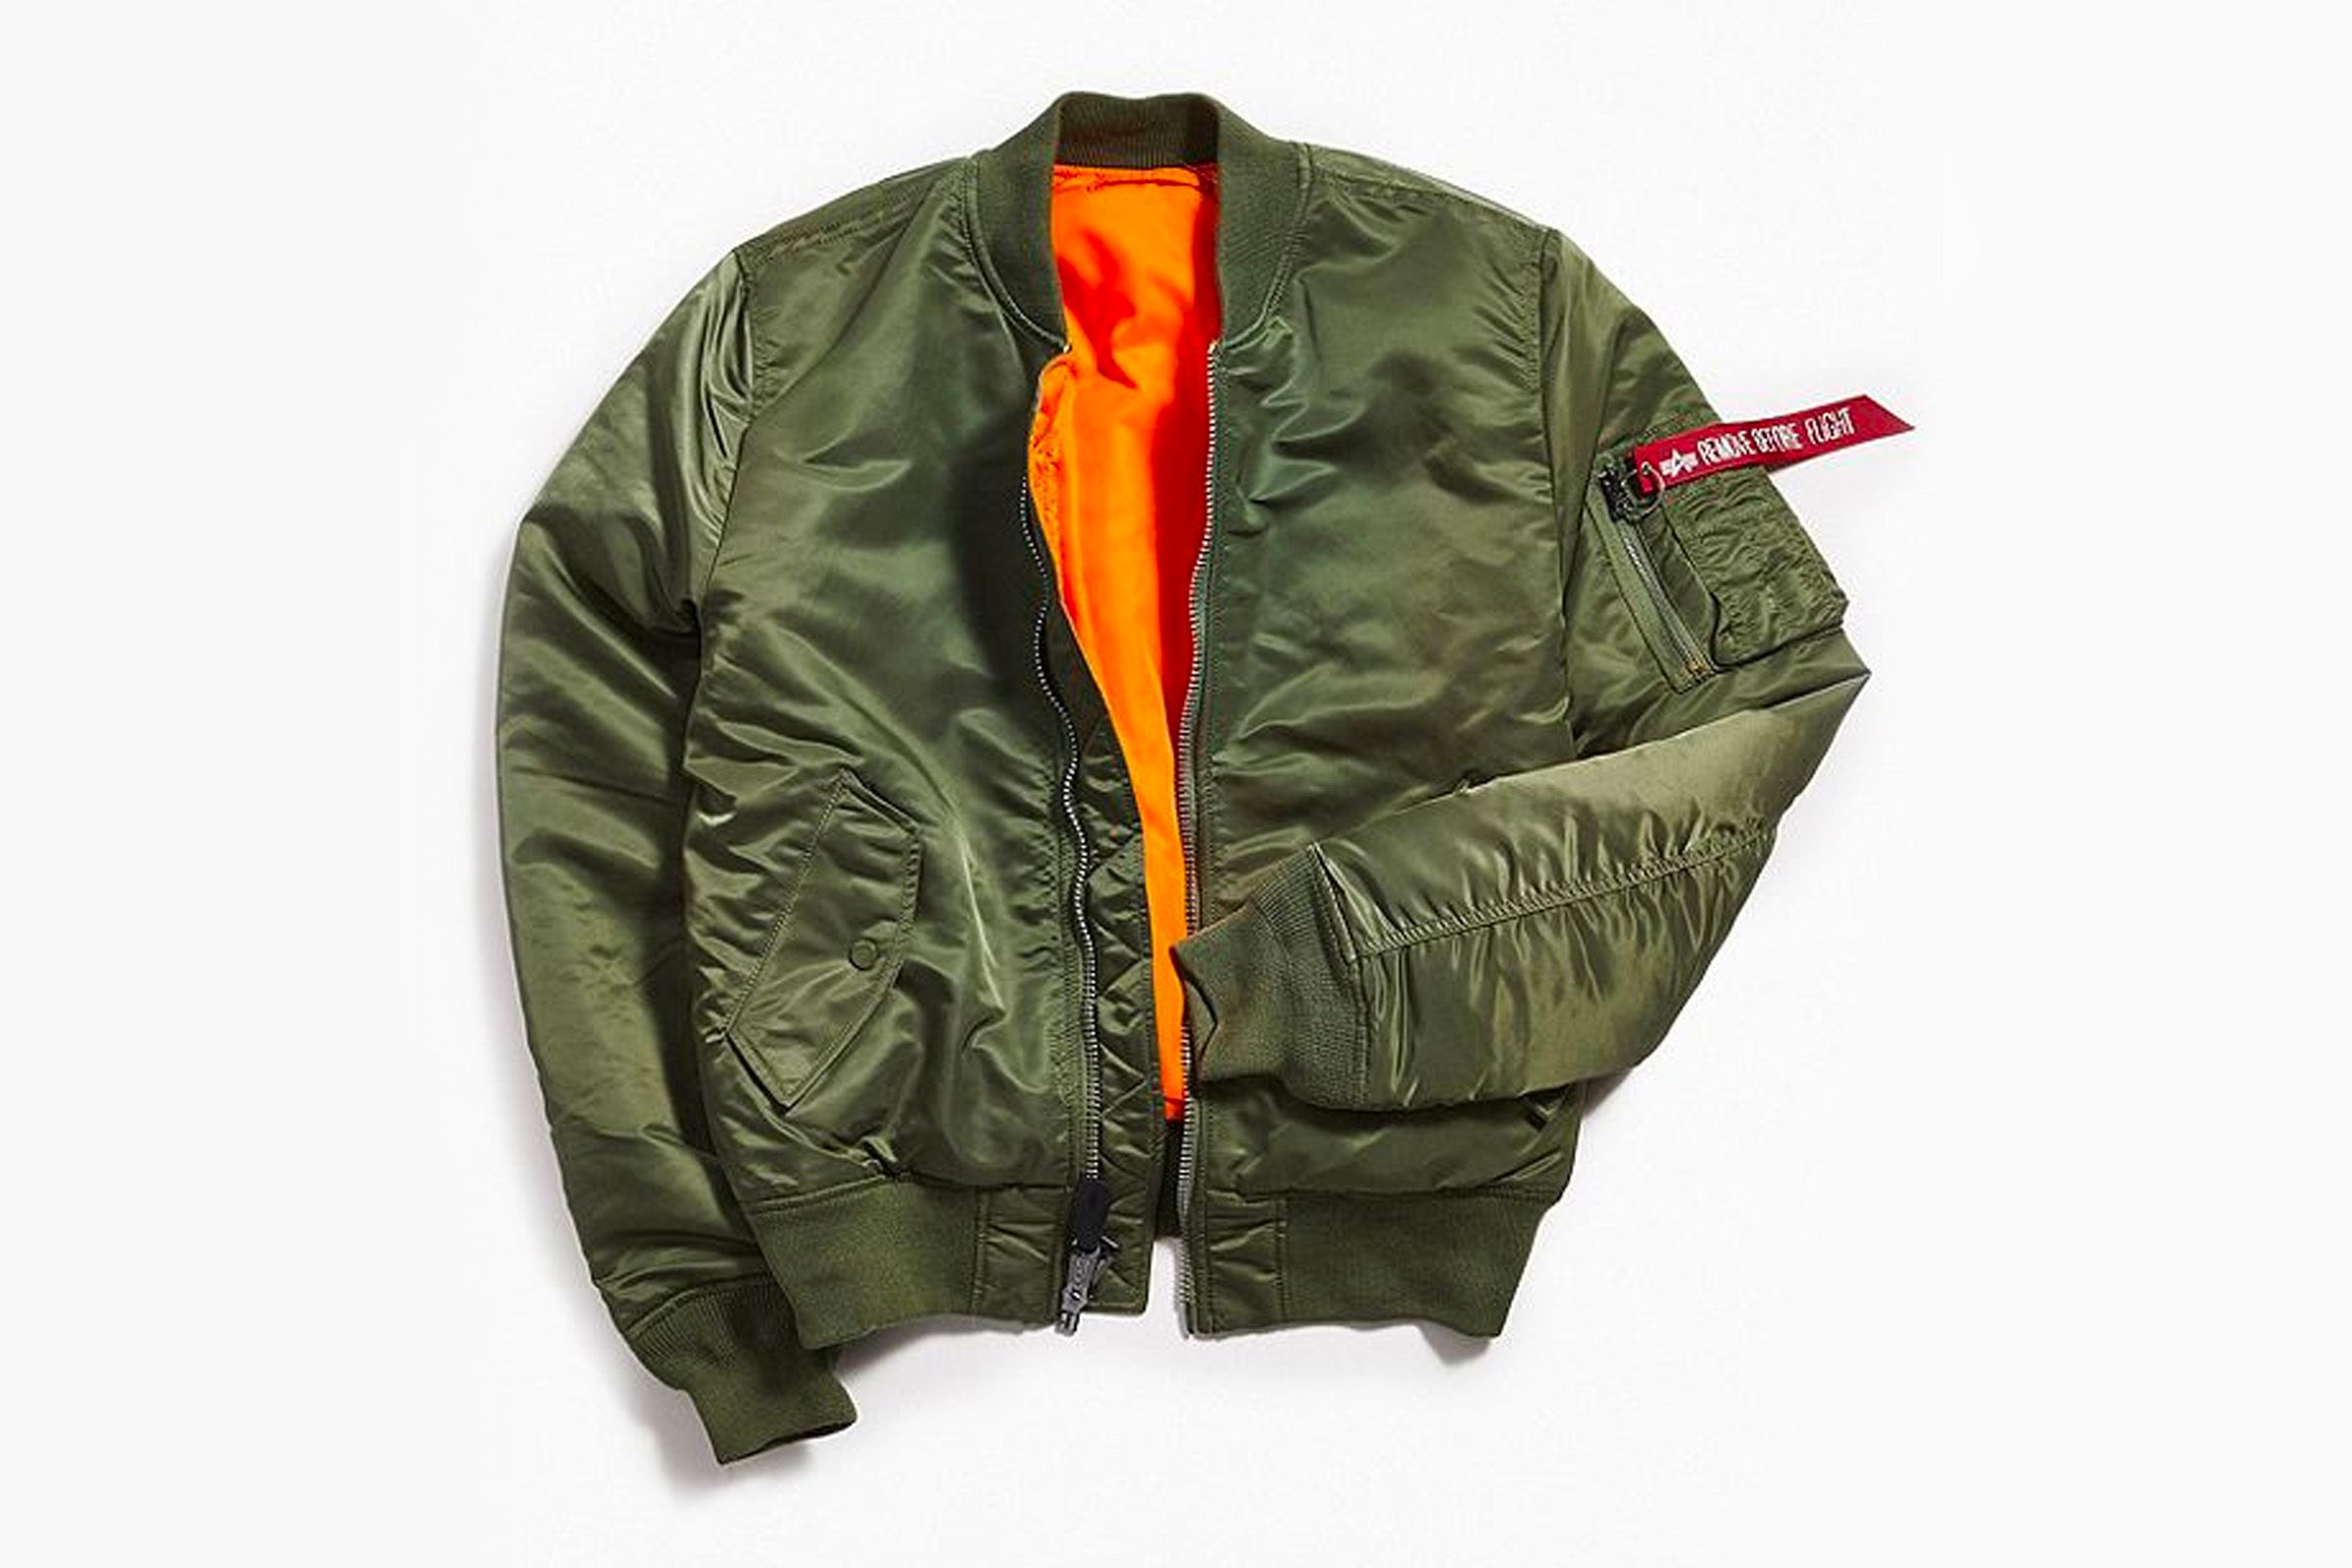 THE BEST Supreme Louis Vuitton Mix Color Luxury Brand Bomber Jacket Limited  Edition